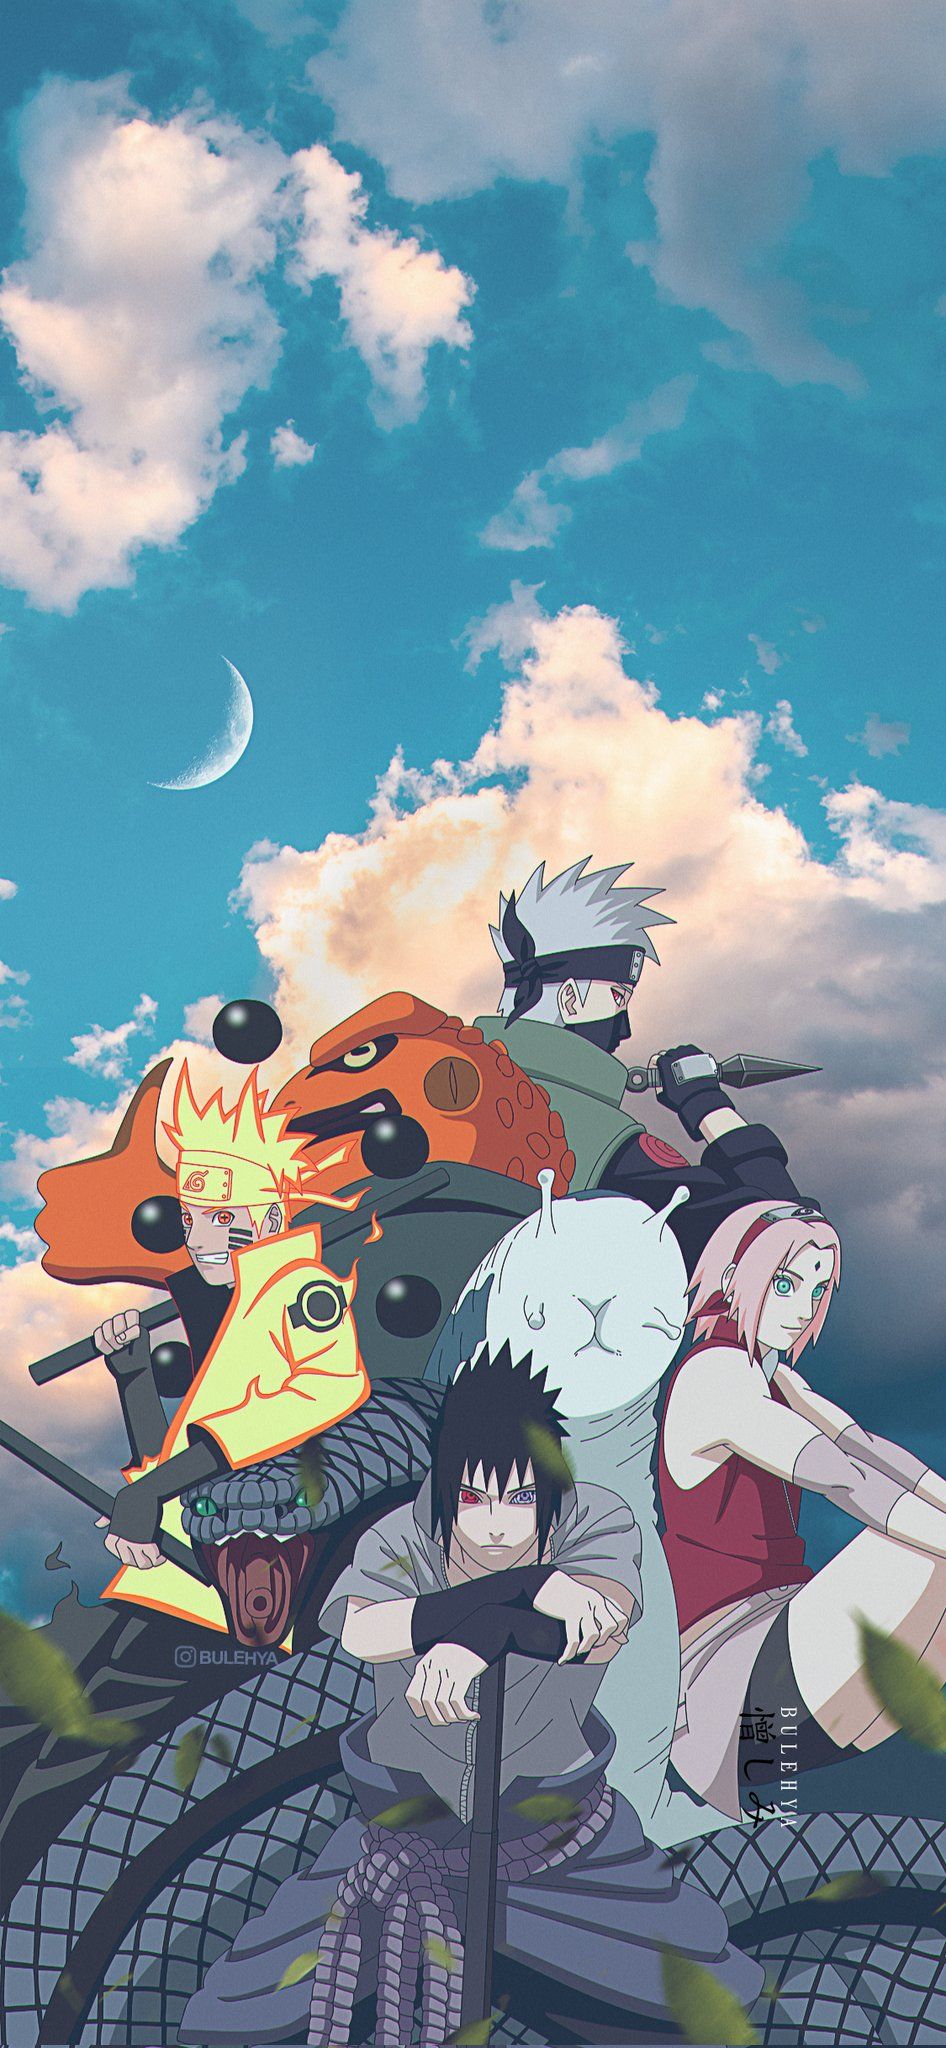 Naruto anime wallpaper for iPhone and Android. - Naruto